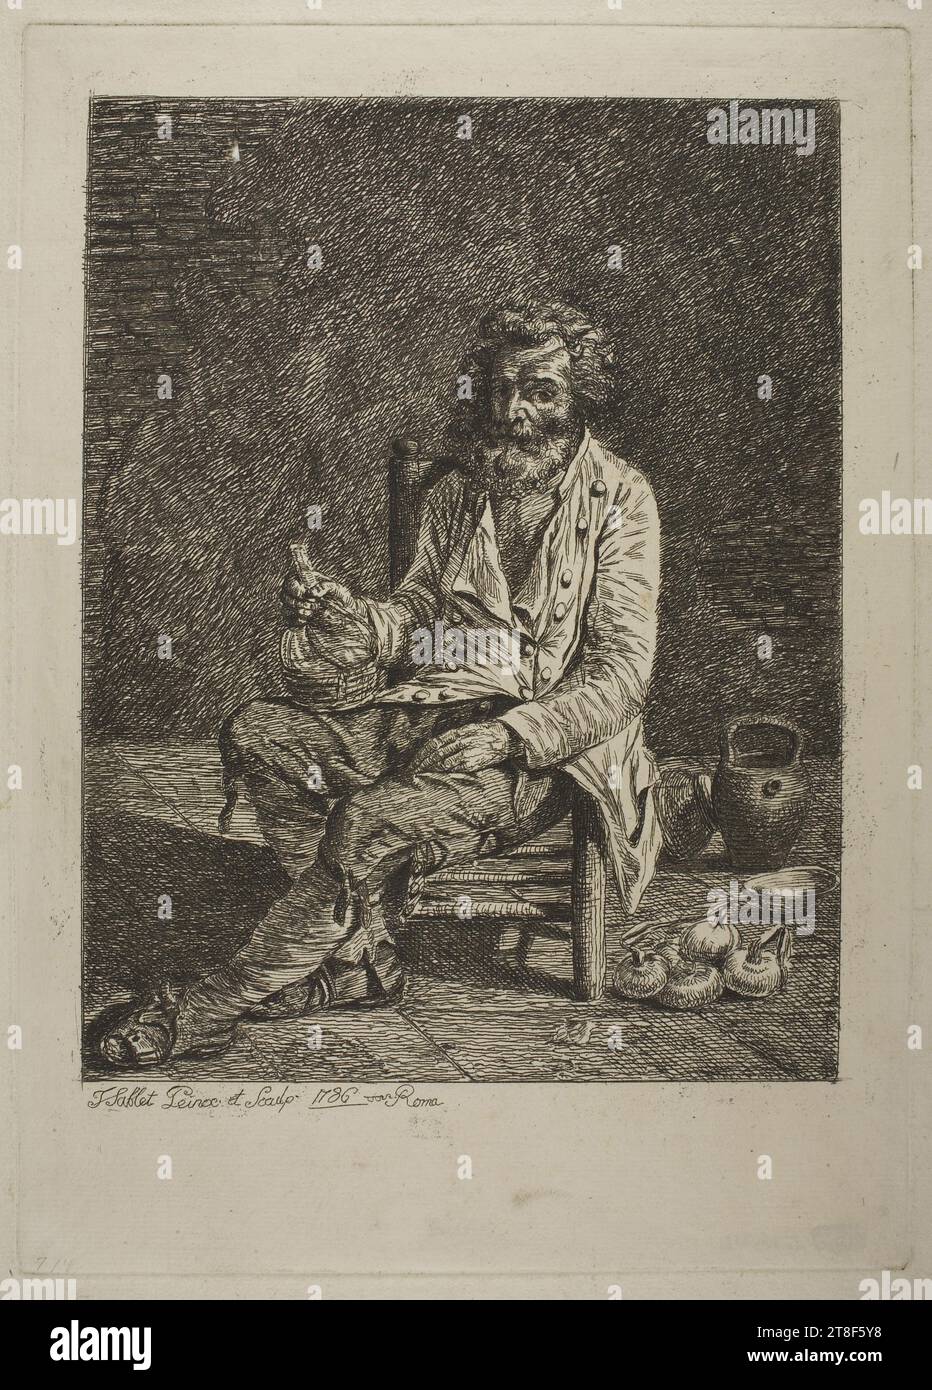 Humble Man Seated with a Bottle in his Hand, Jacques-Henri Sablet, 1786, Graphic Art, Etching, Paper, Color, Printer's ink, Etching, Printet, Height (plate size) 285 mm, Height (paper size) 353 mm, Width (plate size) 205 mm, Width (paper size) 260 mm, J Sablet Pinx et Sculp 1786 Roma, Graphic Design, European, Enlightenment (1690 - 1800 Stock Photo